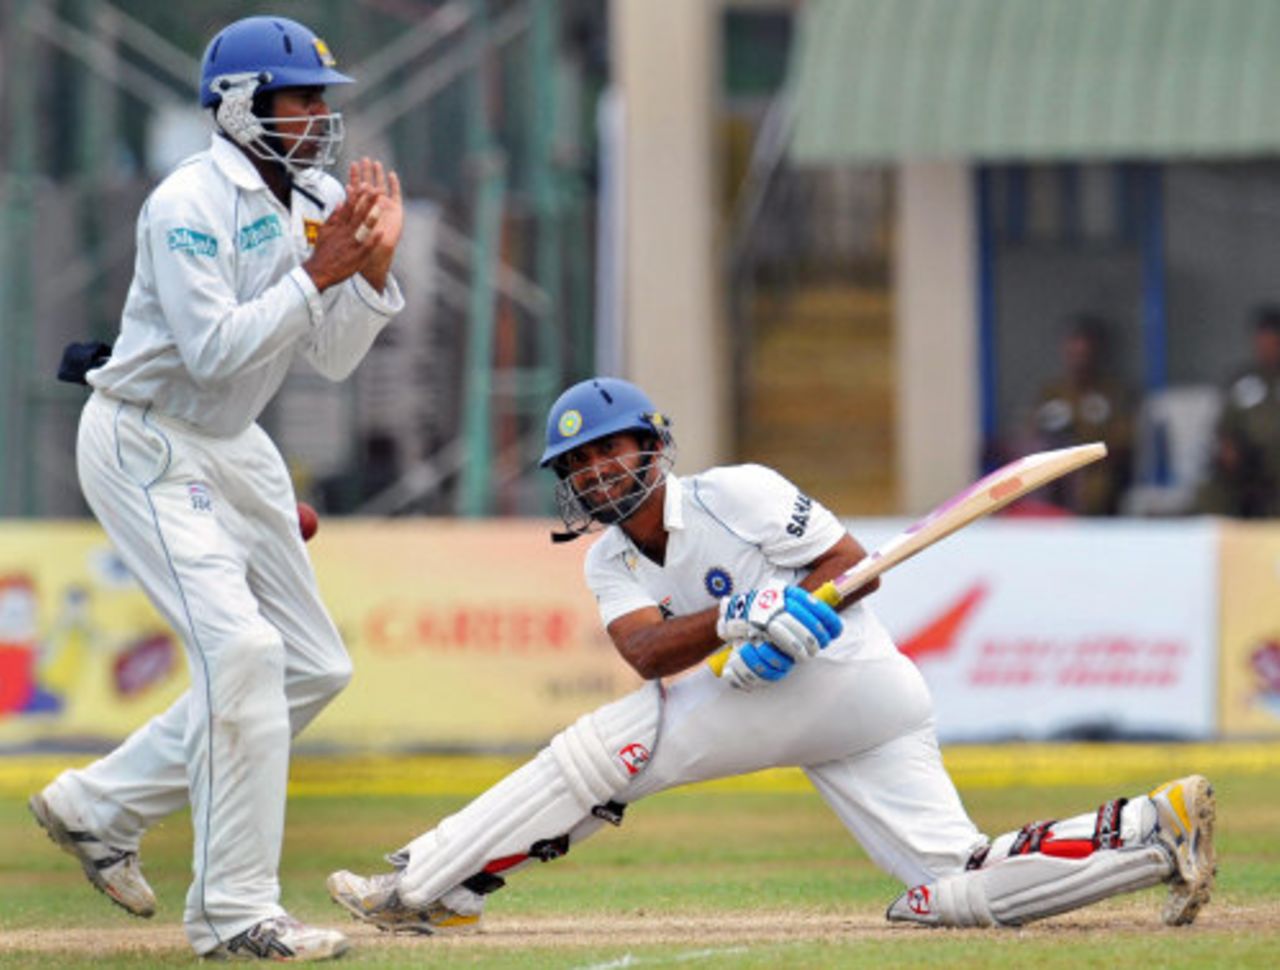 Dinesh Karthik sweeps in the pursuit of quick runs, Sri Lanka v India, 2nd Test, Galle, 4th day, August 3, 2008